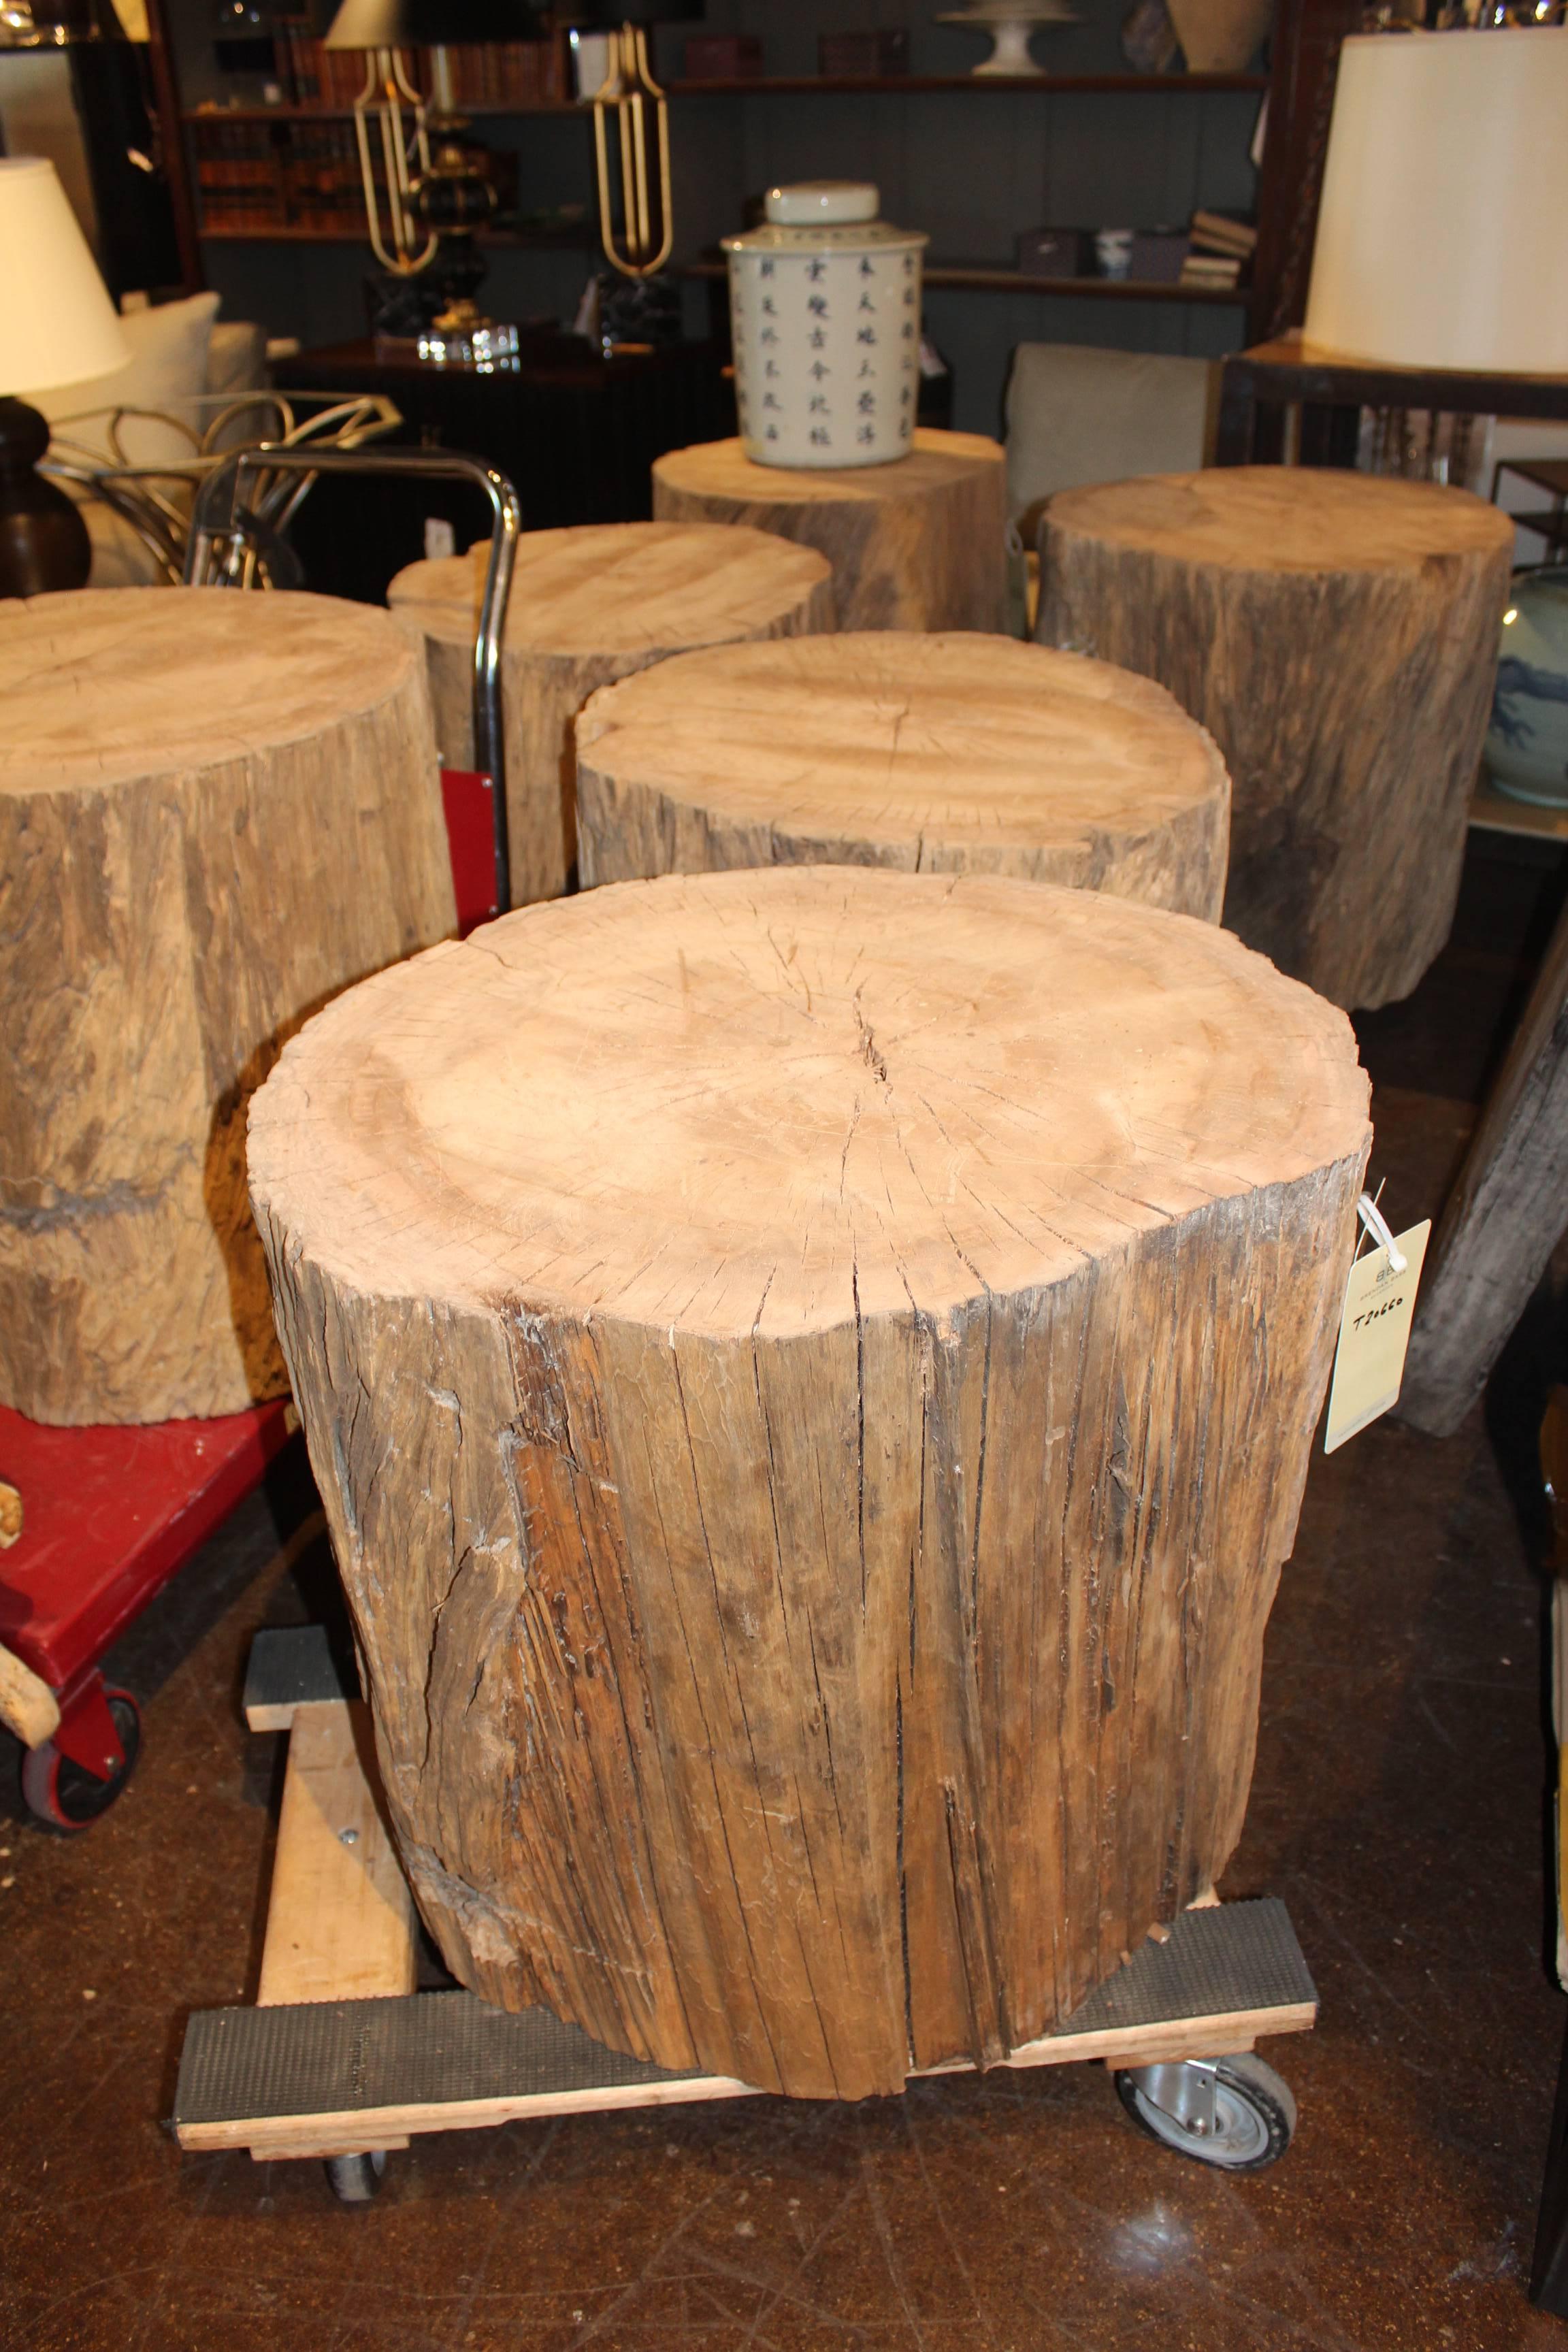 American Oak Section as End Table from the Bass Farm in North Carolina